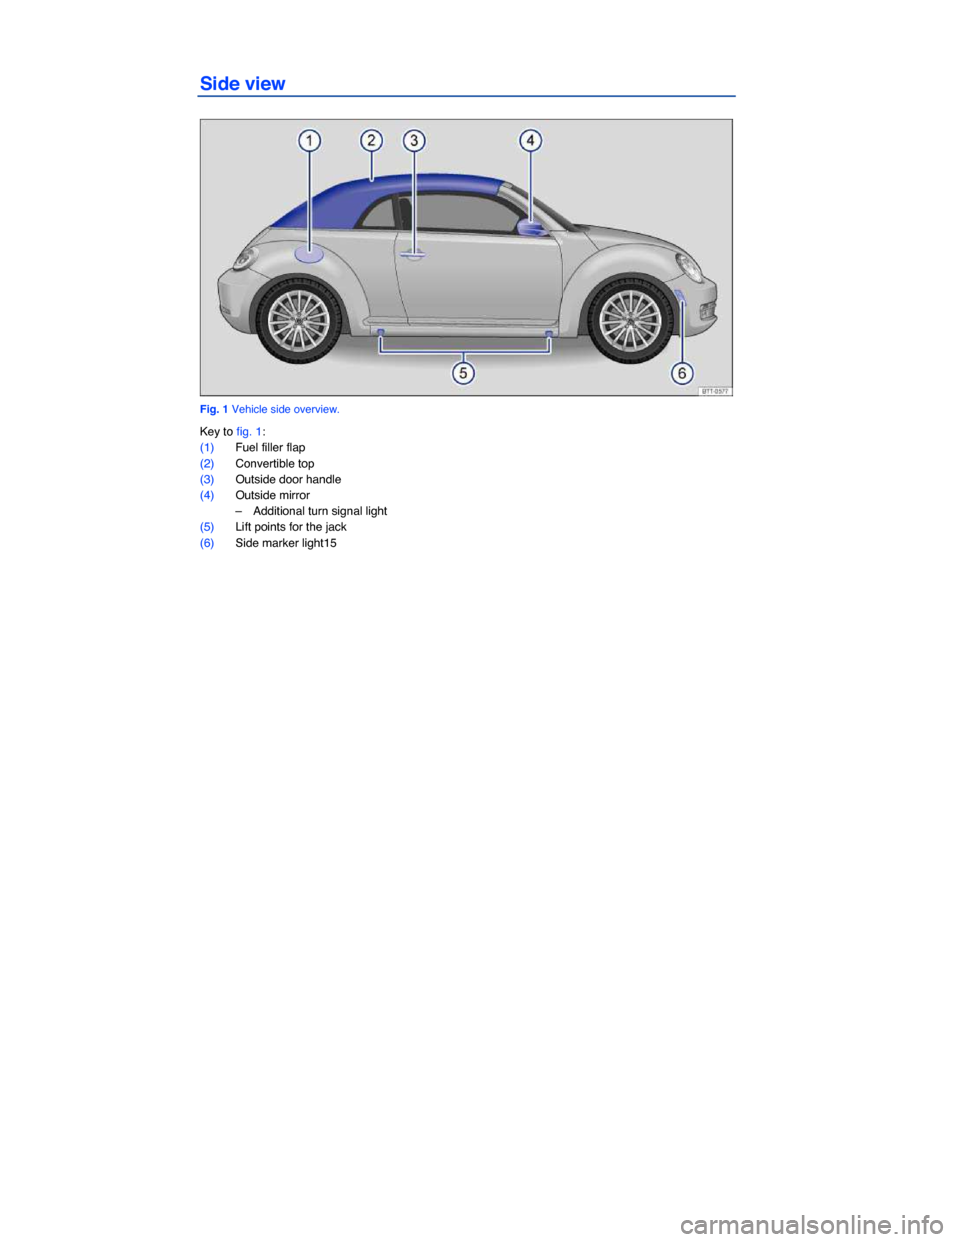 VOLKSWAGEN BEETLE CONVERTIBLE 2014 3.G Owners Manual  
Side view 
 
Fig. 1 Vehicle side overview. 
Key to fig. 1: 
(1) Fuel filler flap  
(2) Convertible top  
(3) Outside door handle  
(4) Outside mirror  
–  Additional turn signal light  
(5) Lift p